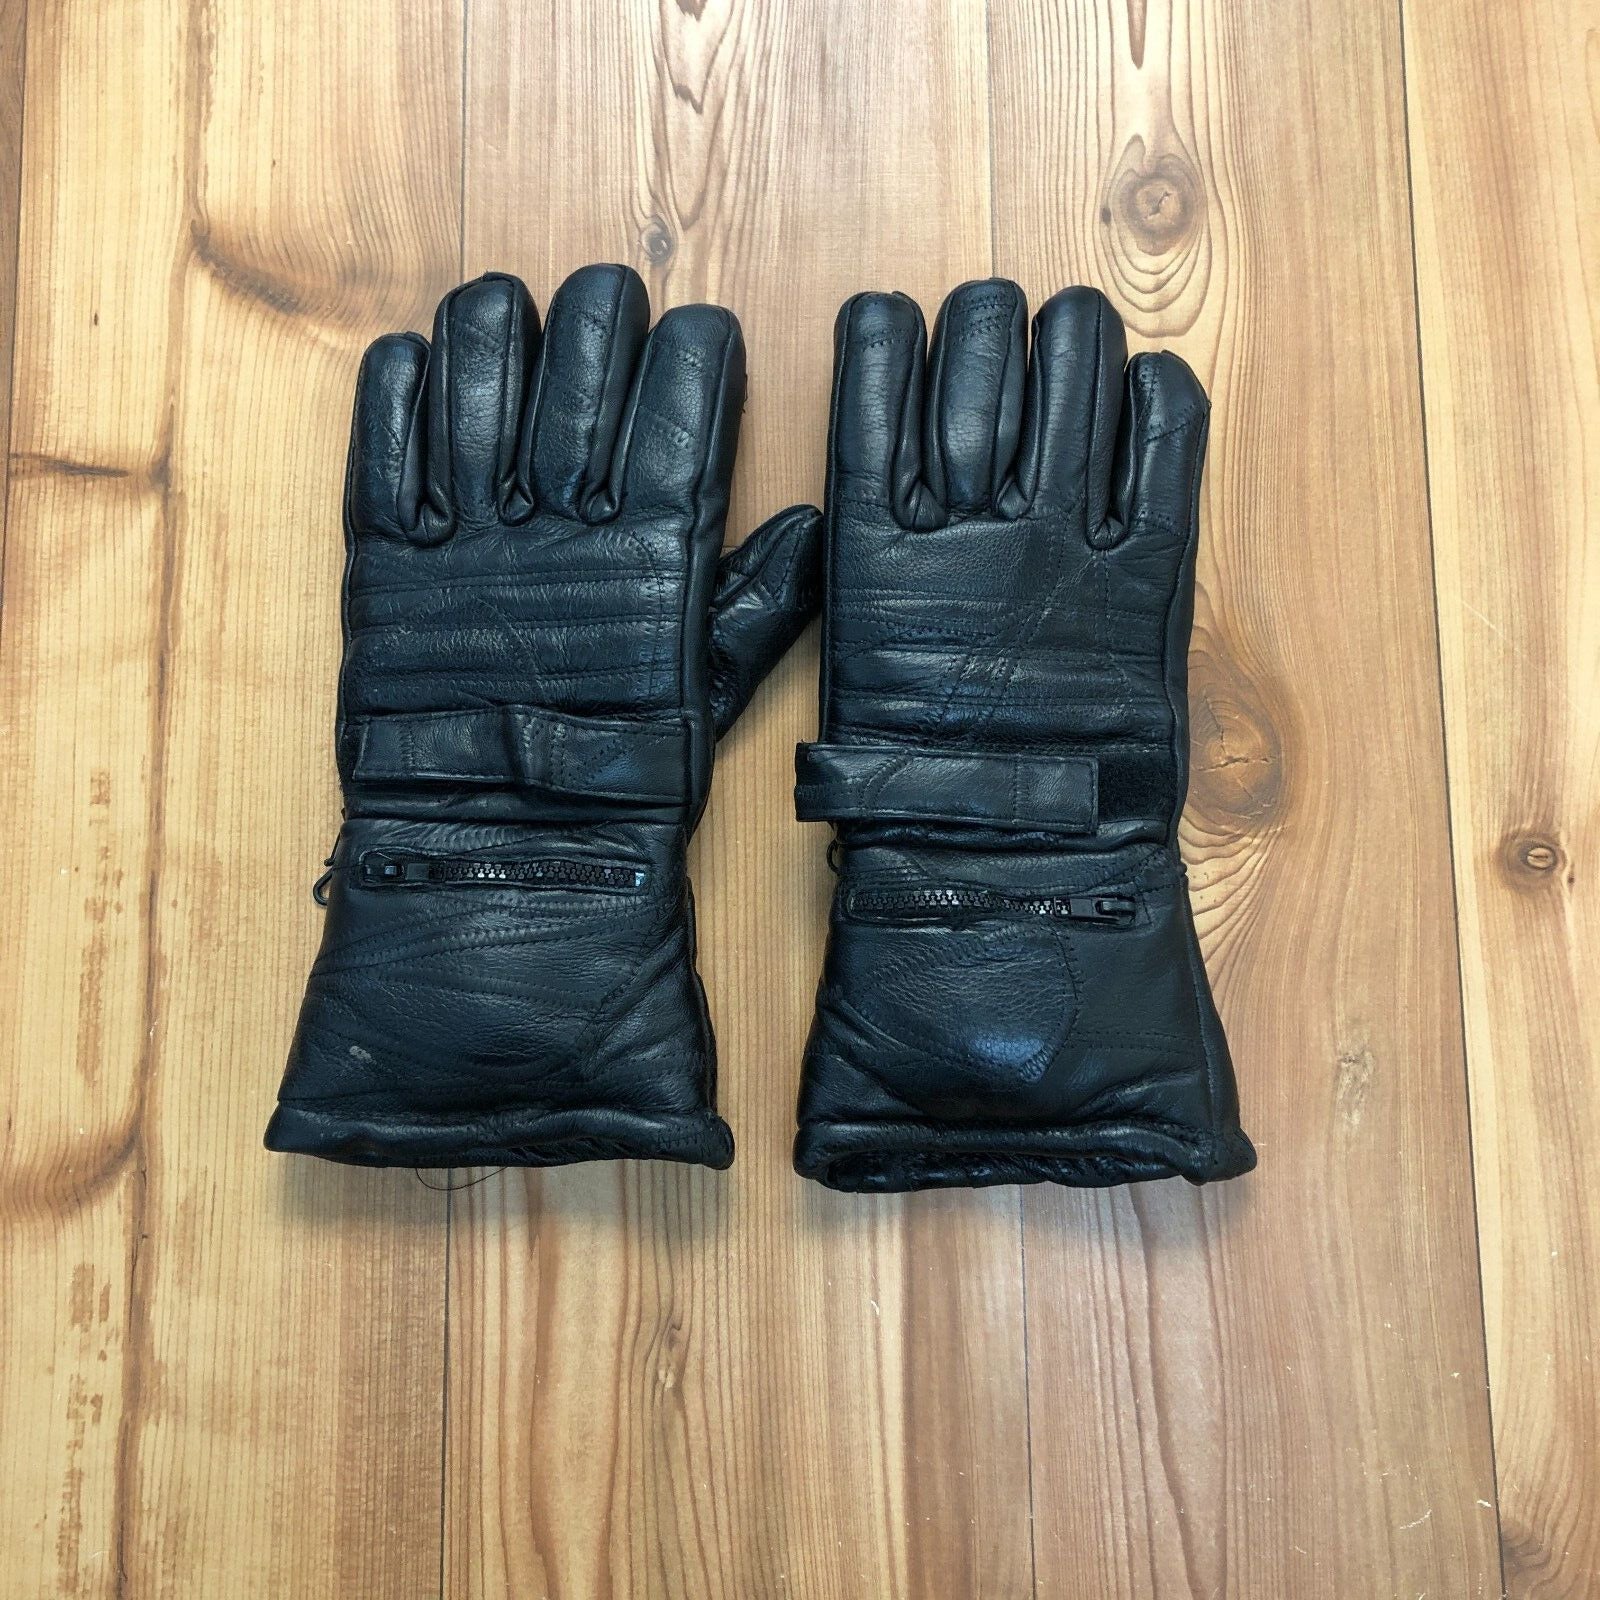 Vintage Thinsulate Black Leather Gloves With Zipper and Hand Strap 40 Grams